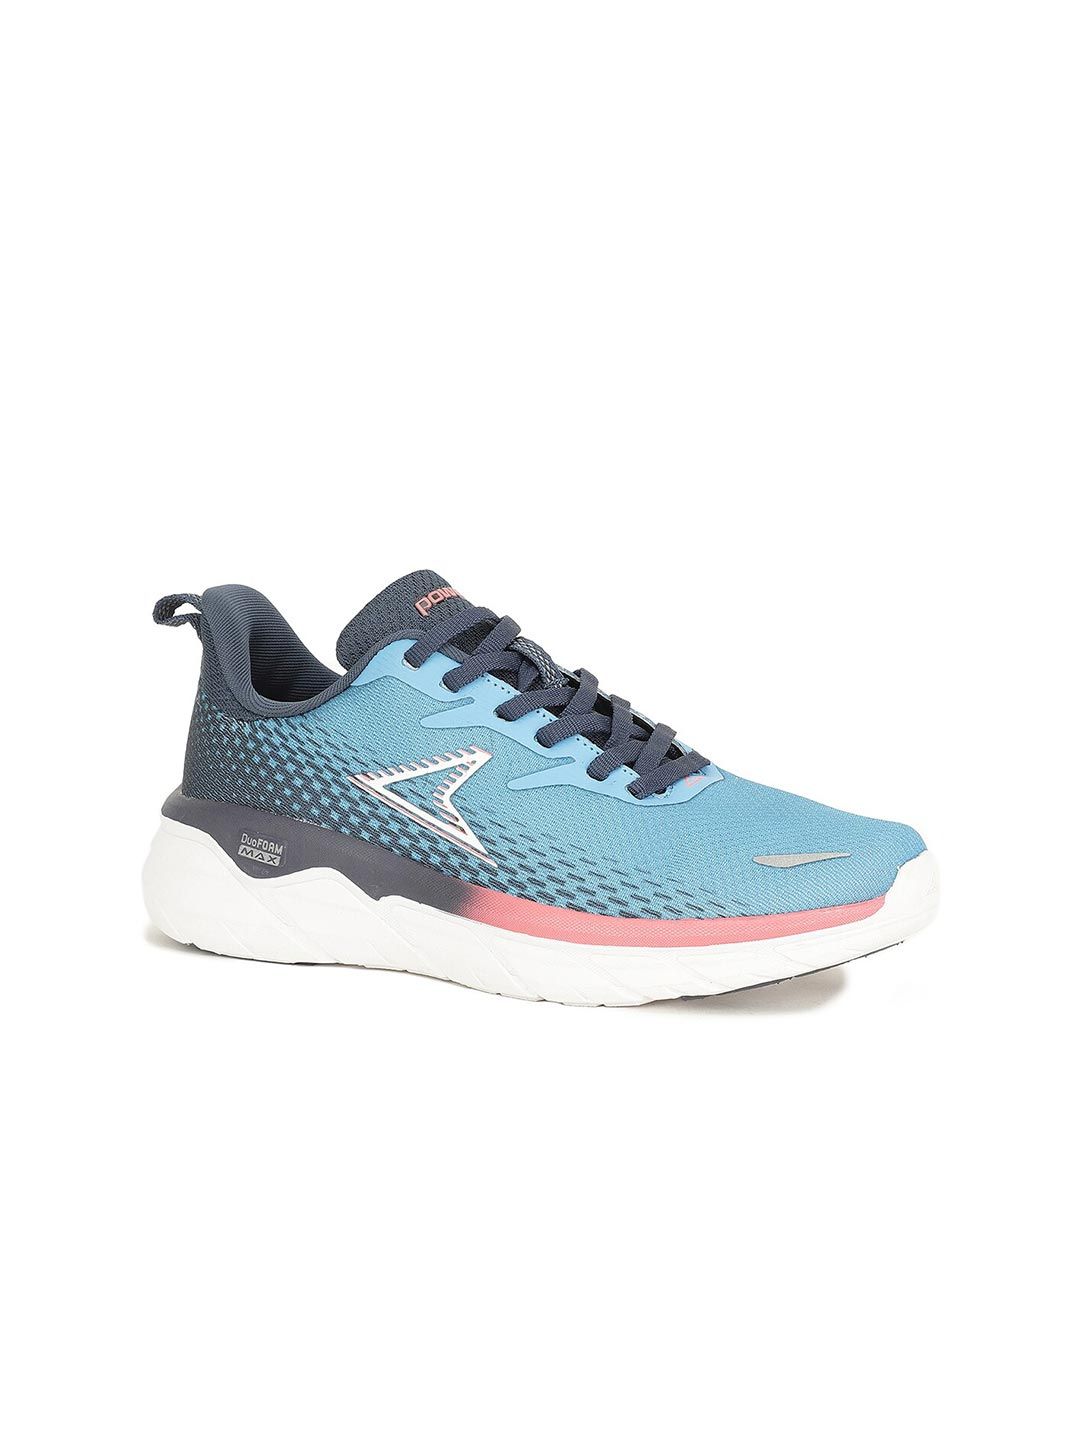 Power Women Blue Mesh Running Non-Marking Shoes Price in India